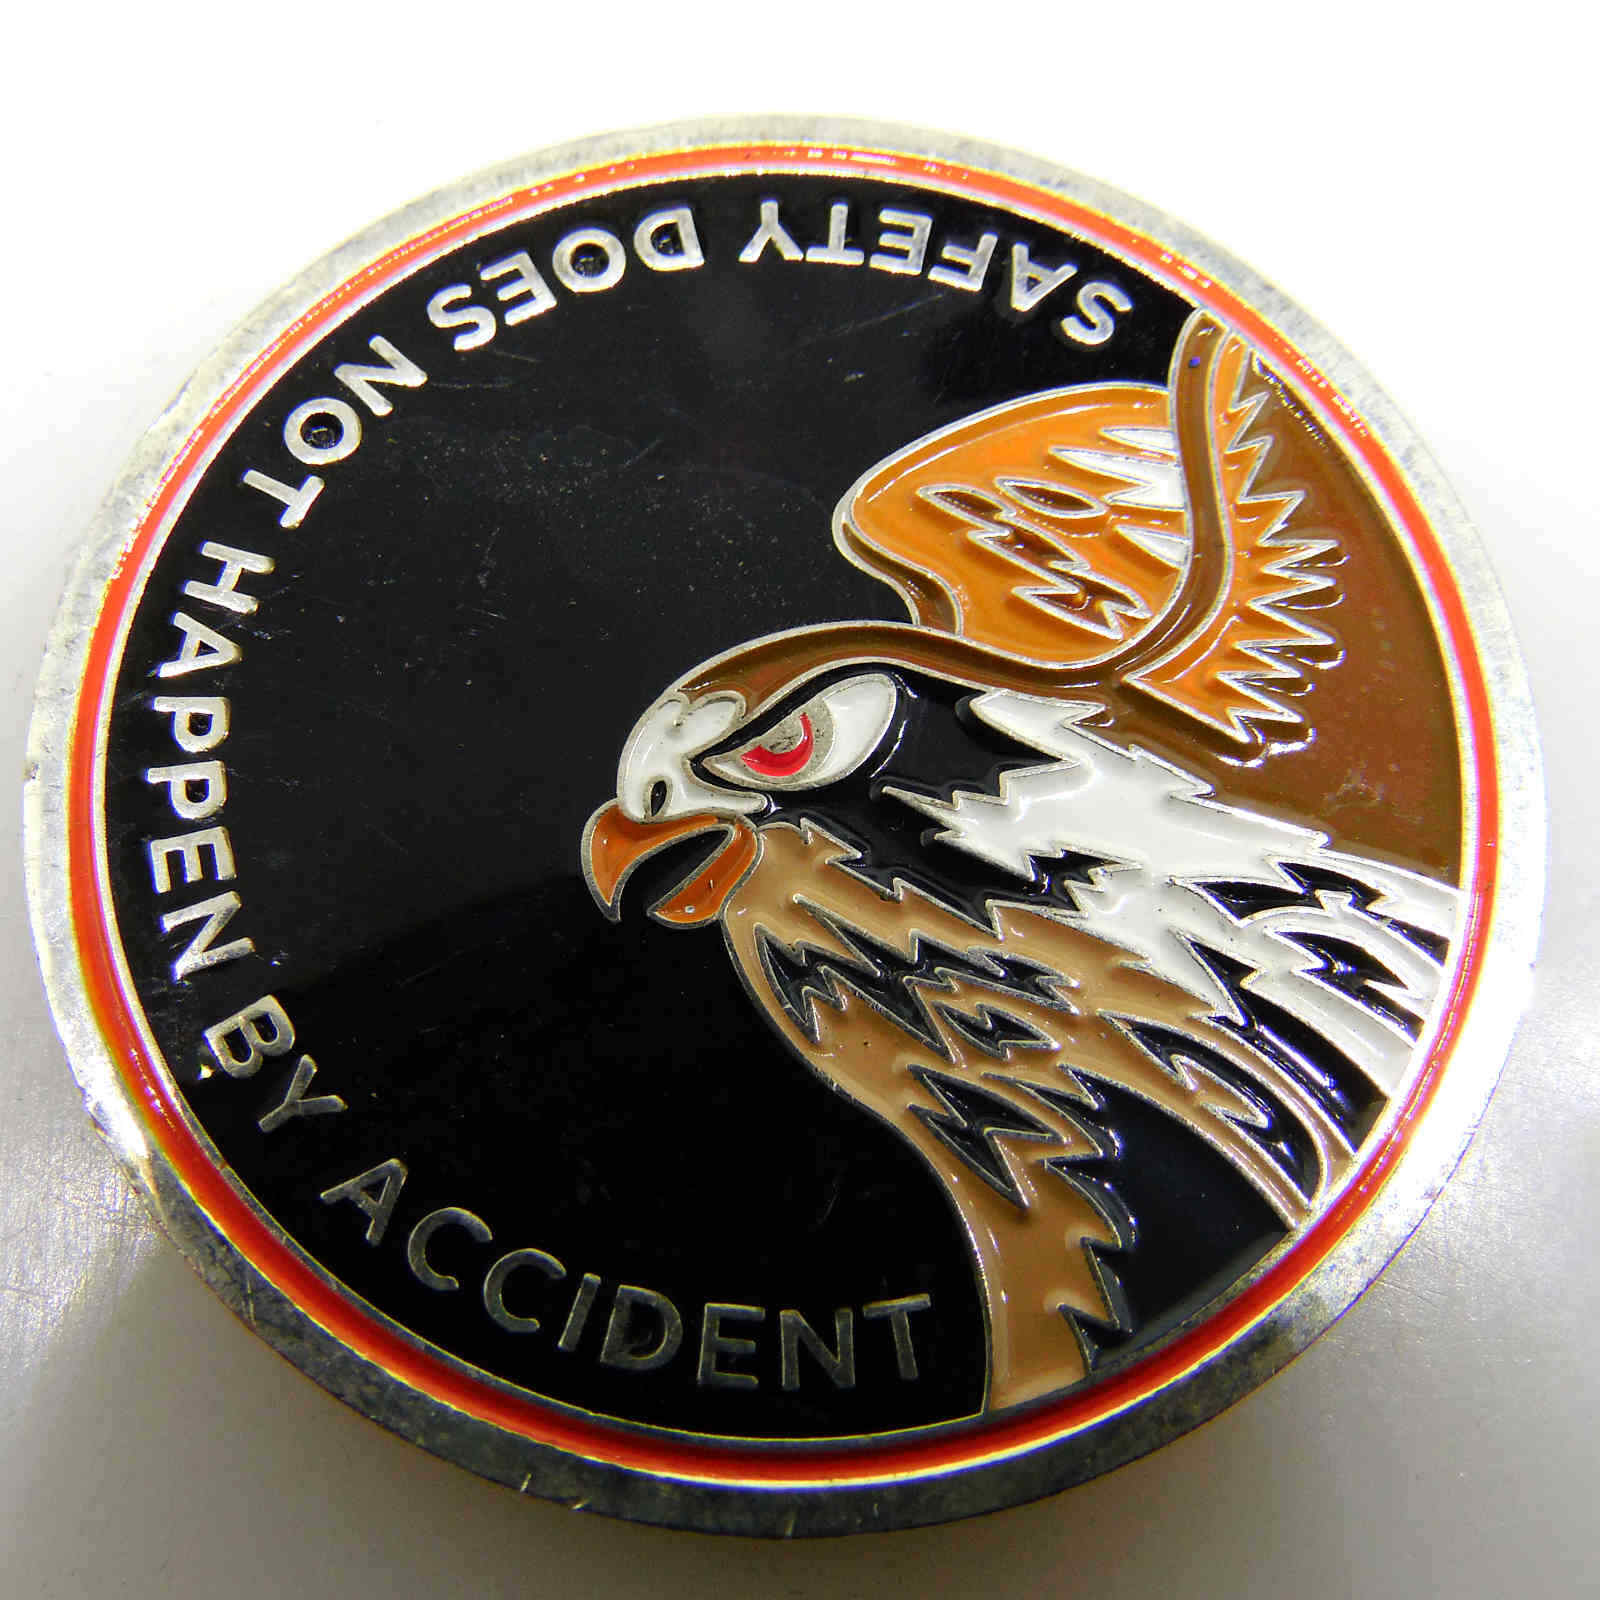 BOWLING GREEN STATE UNIVERSITY CHALLENGE COIN